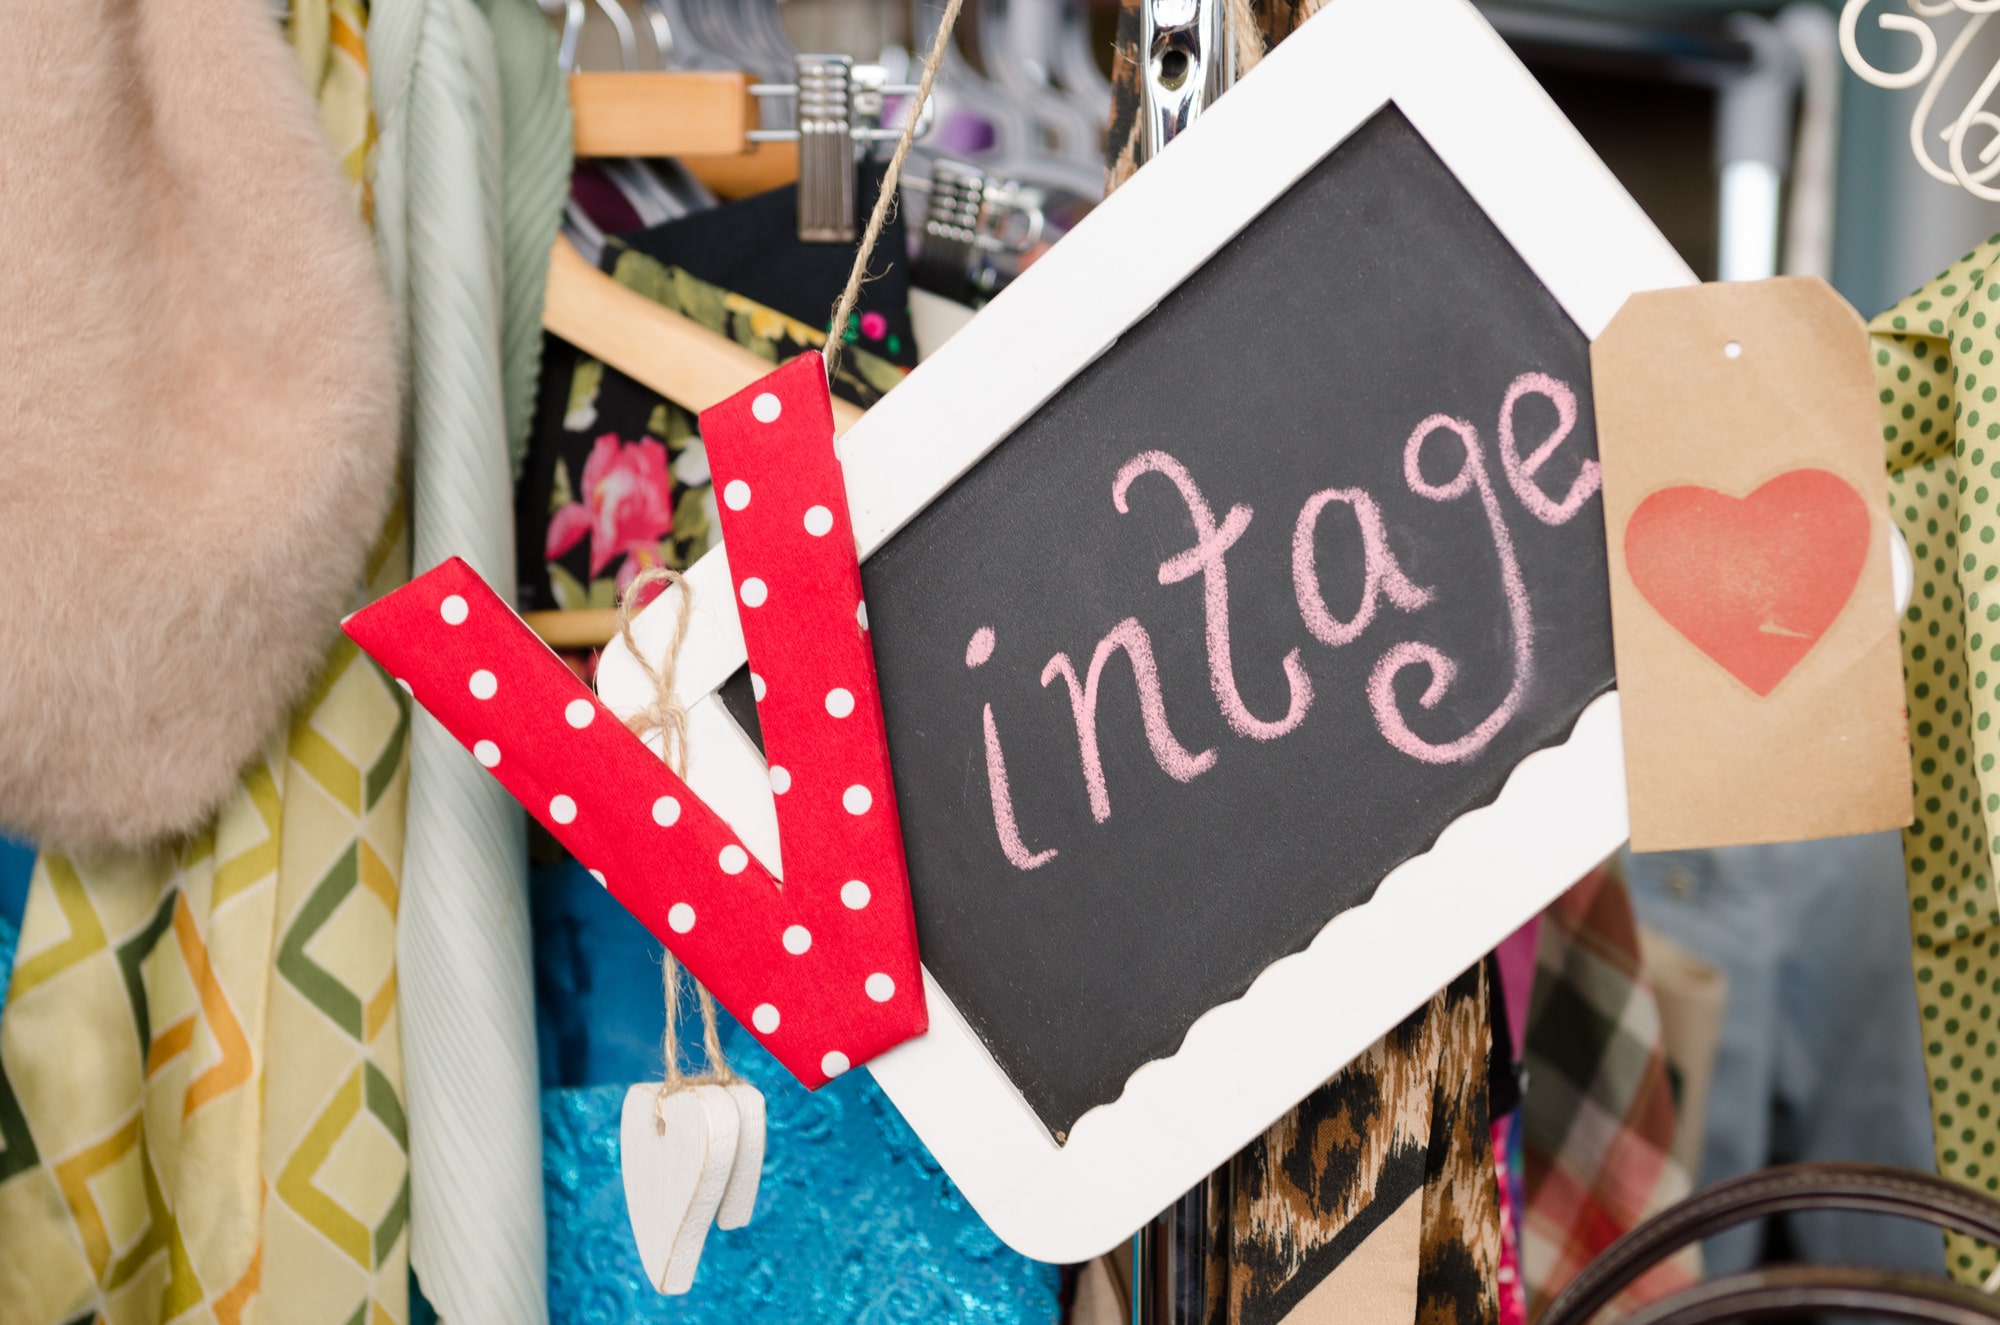 Branded second-hand: what is vintage clothing